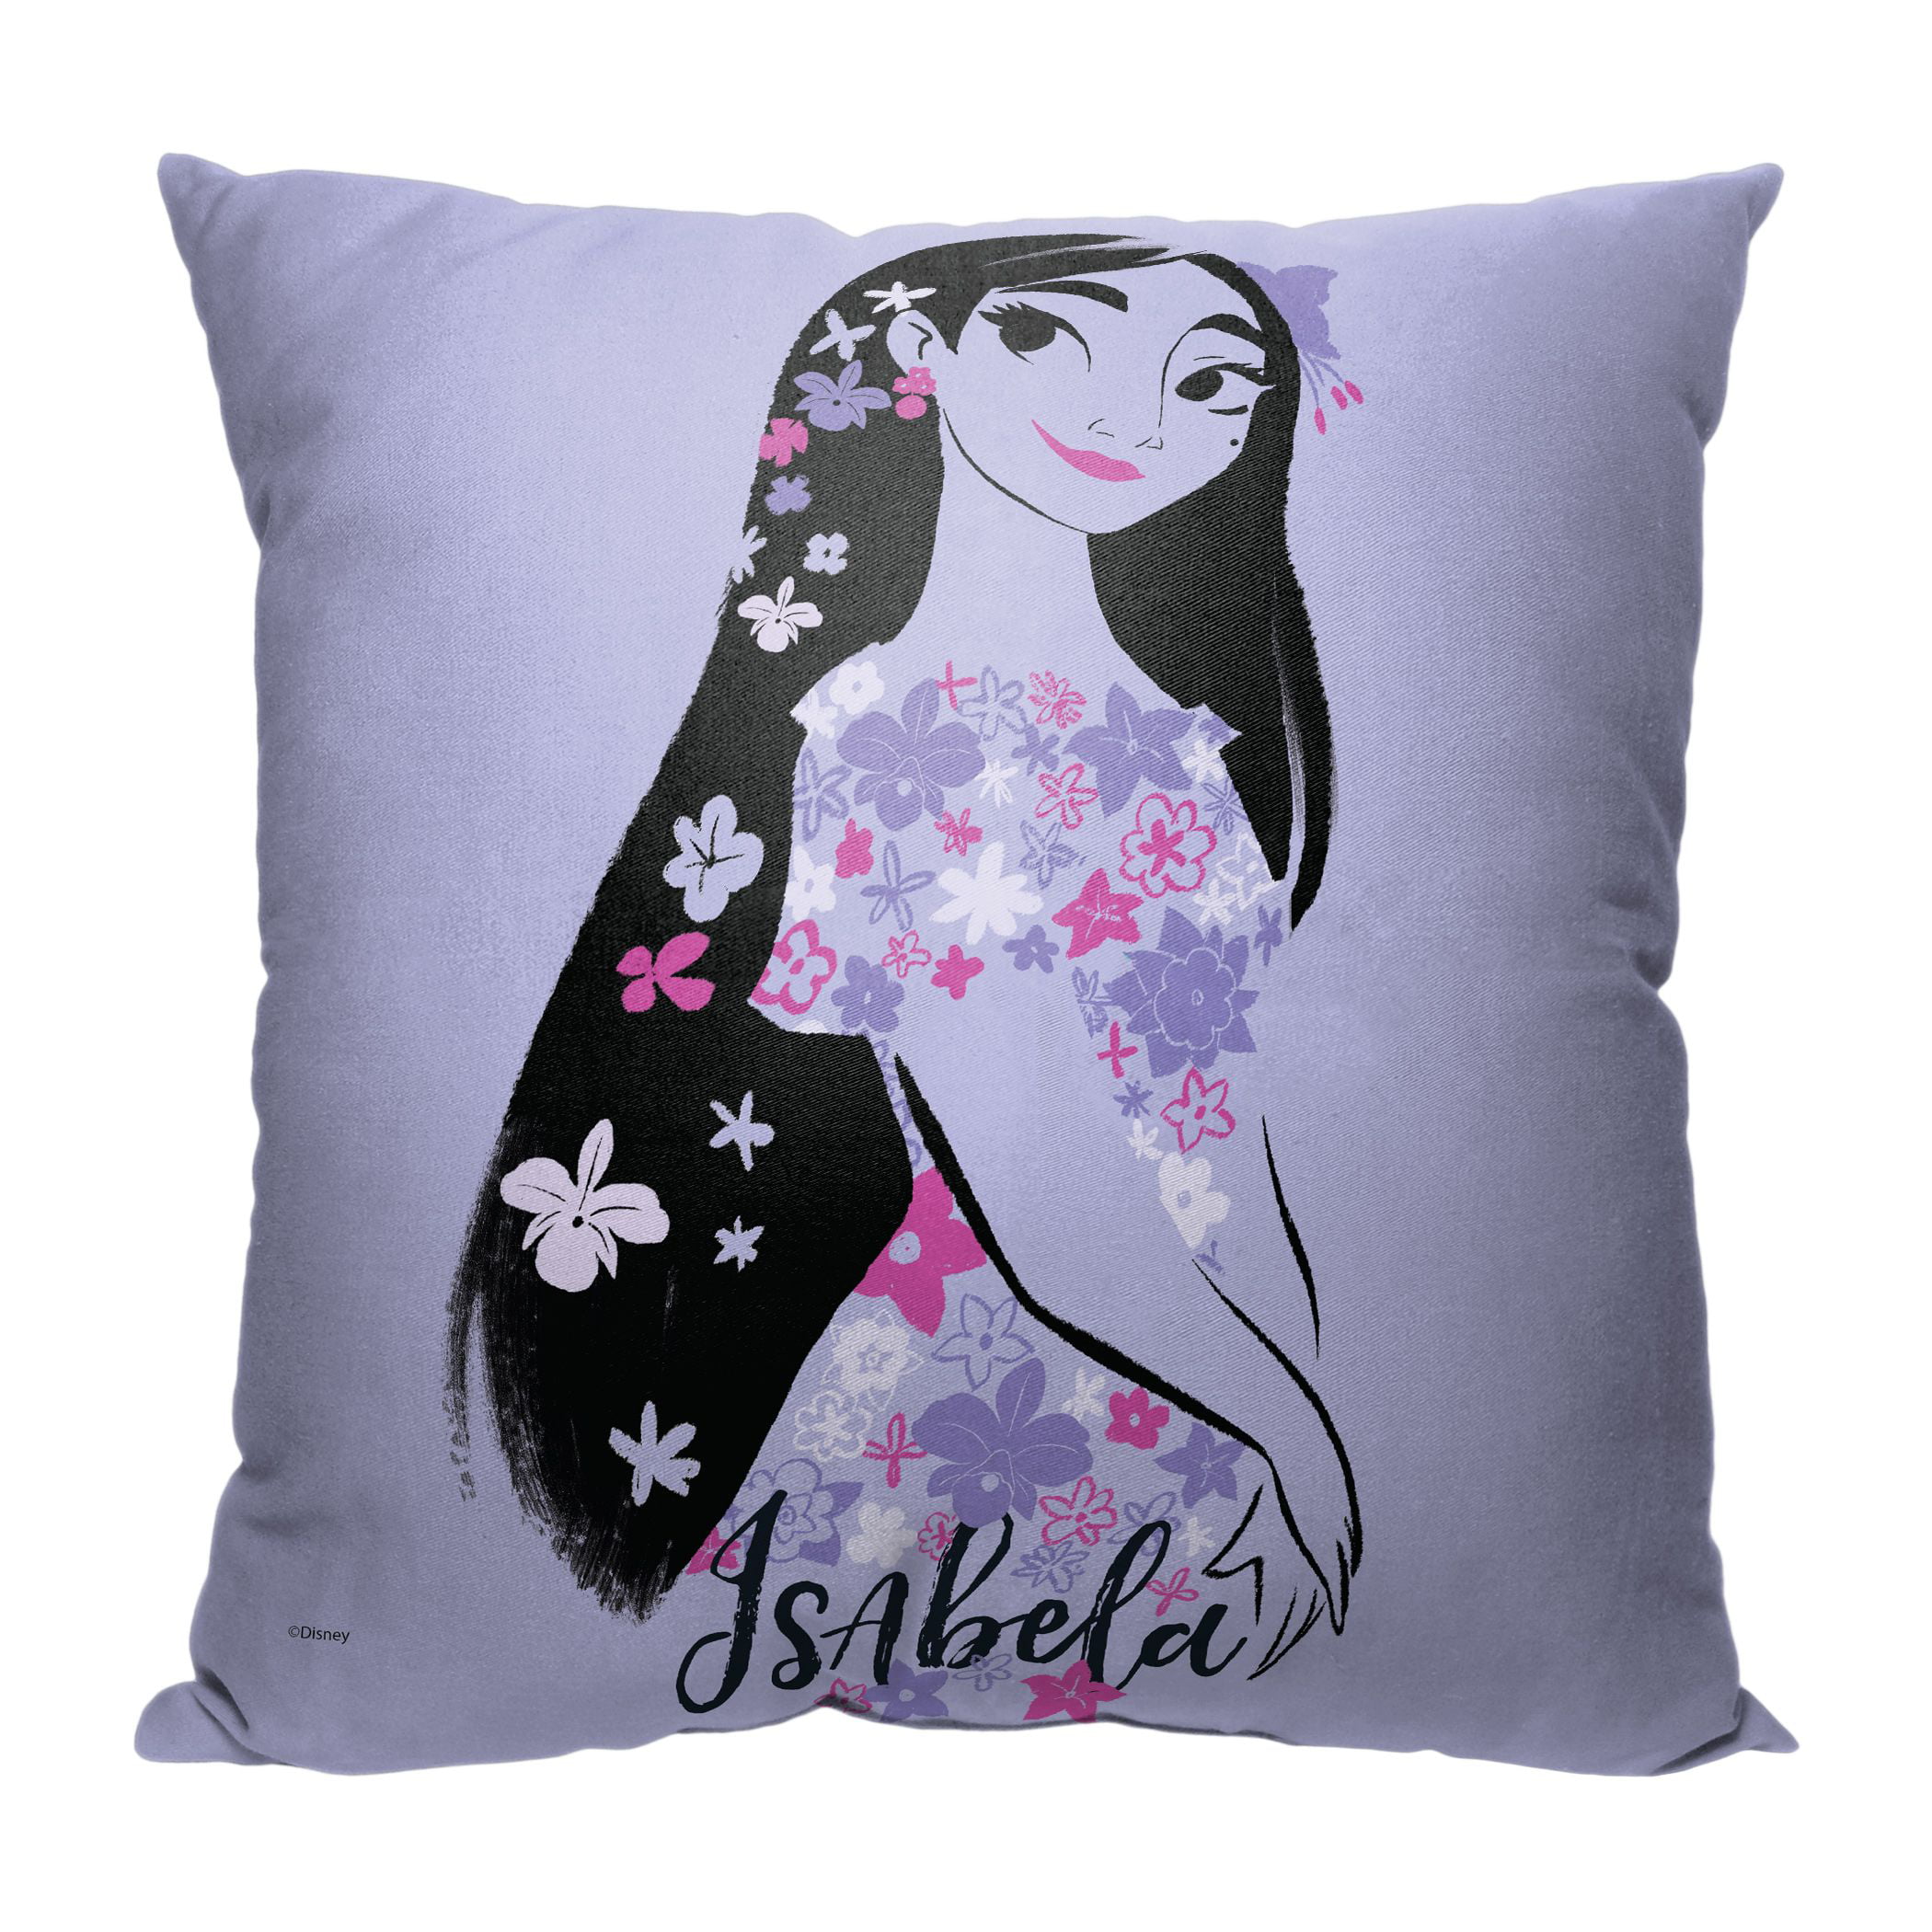 US SELLER mermaid cushion cover inexpensive decorative pillows 